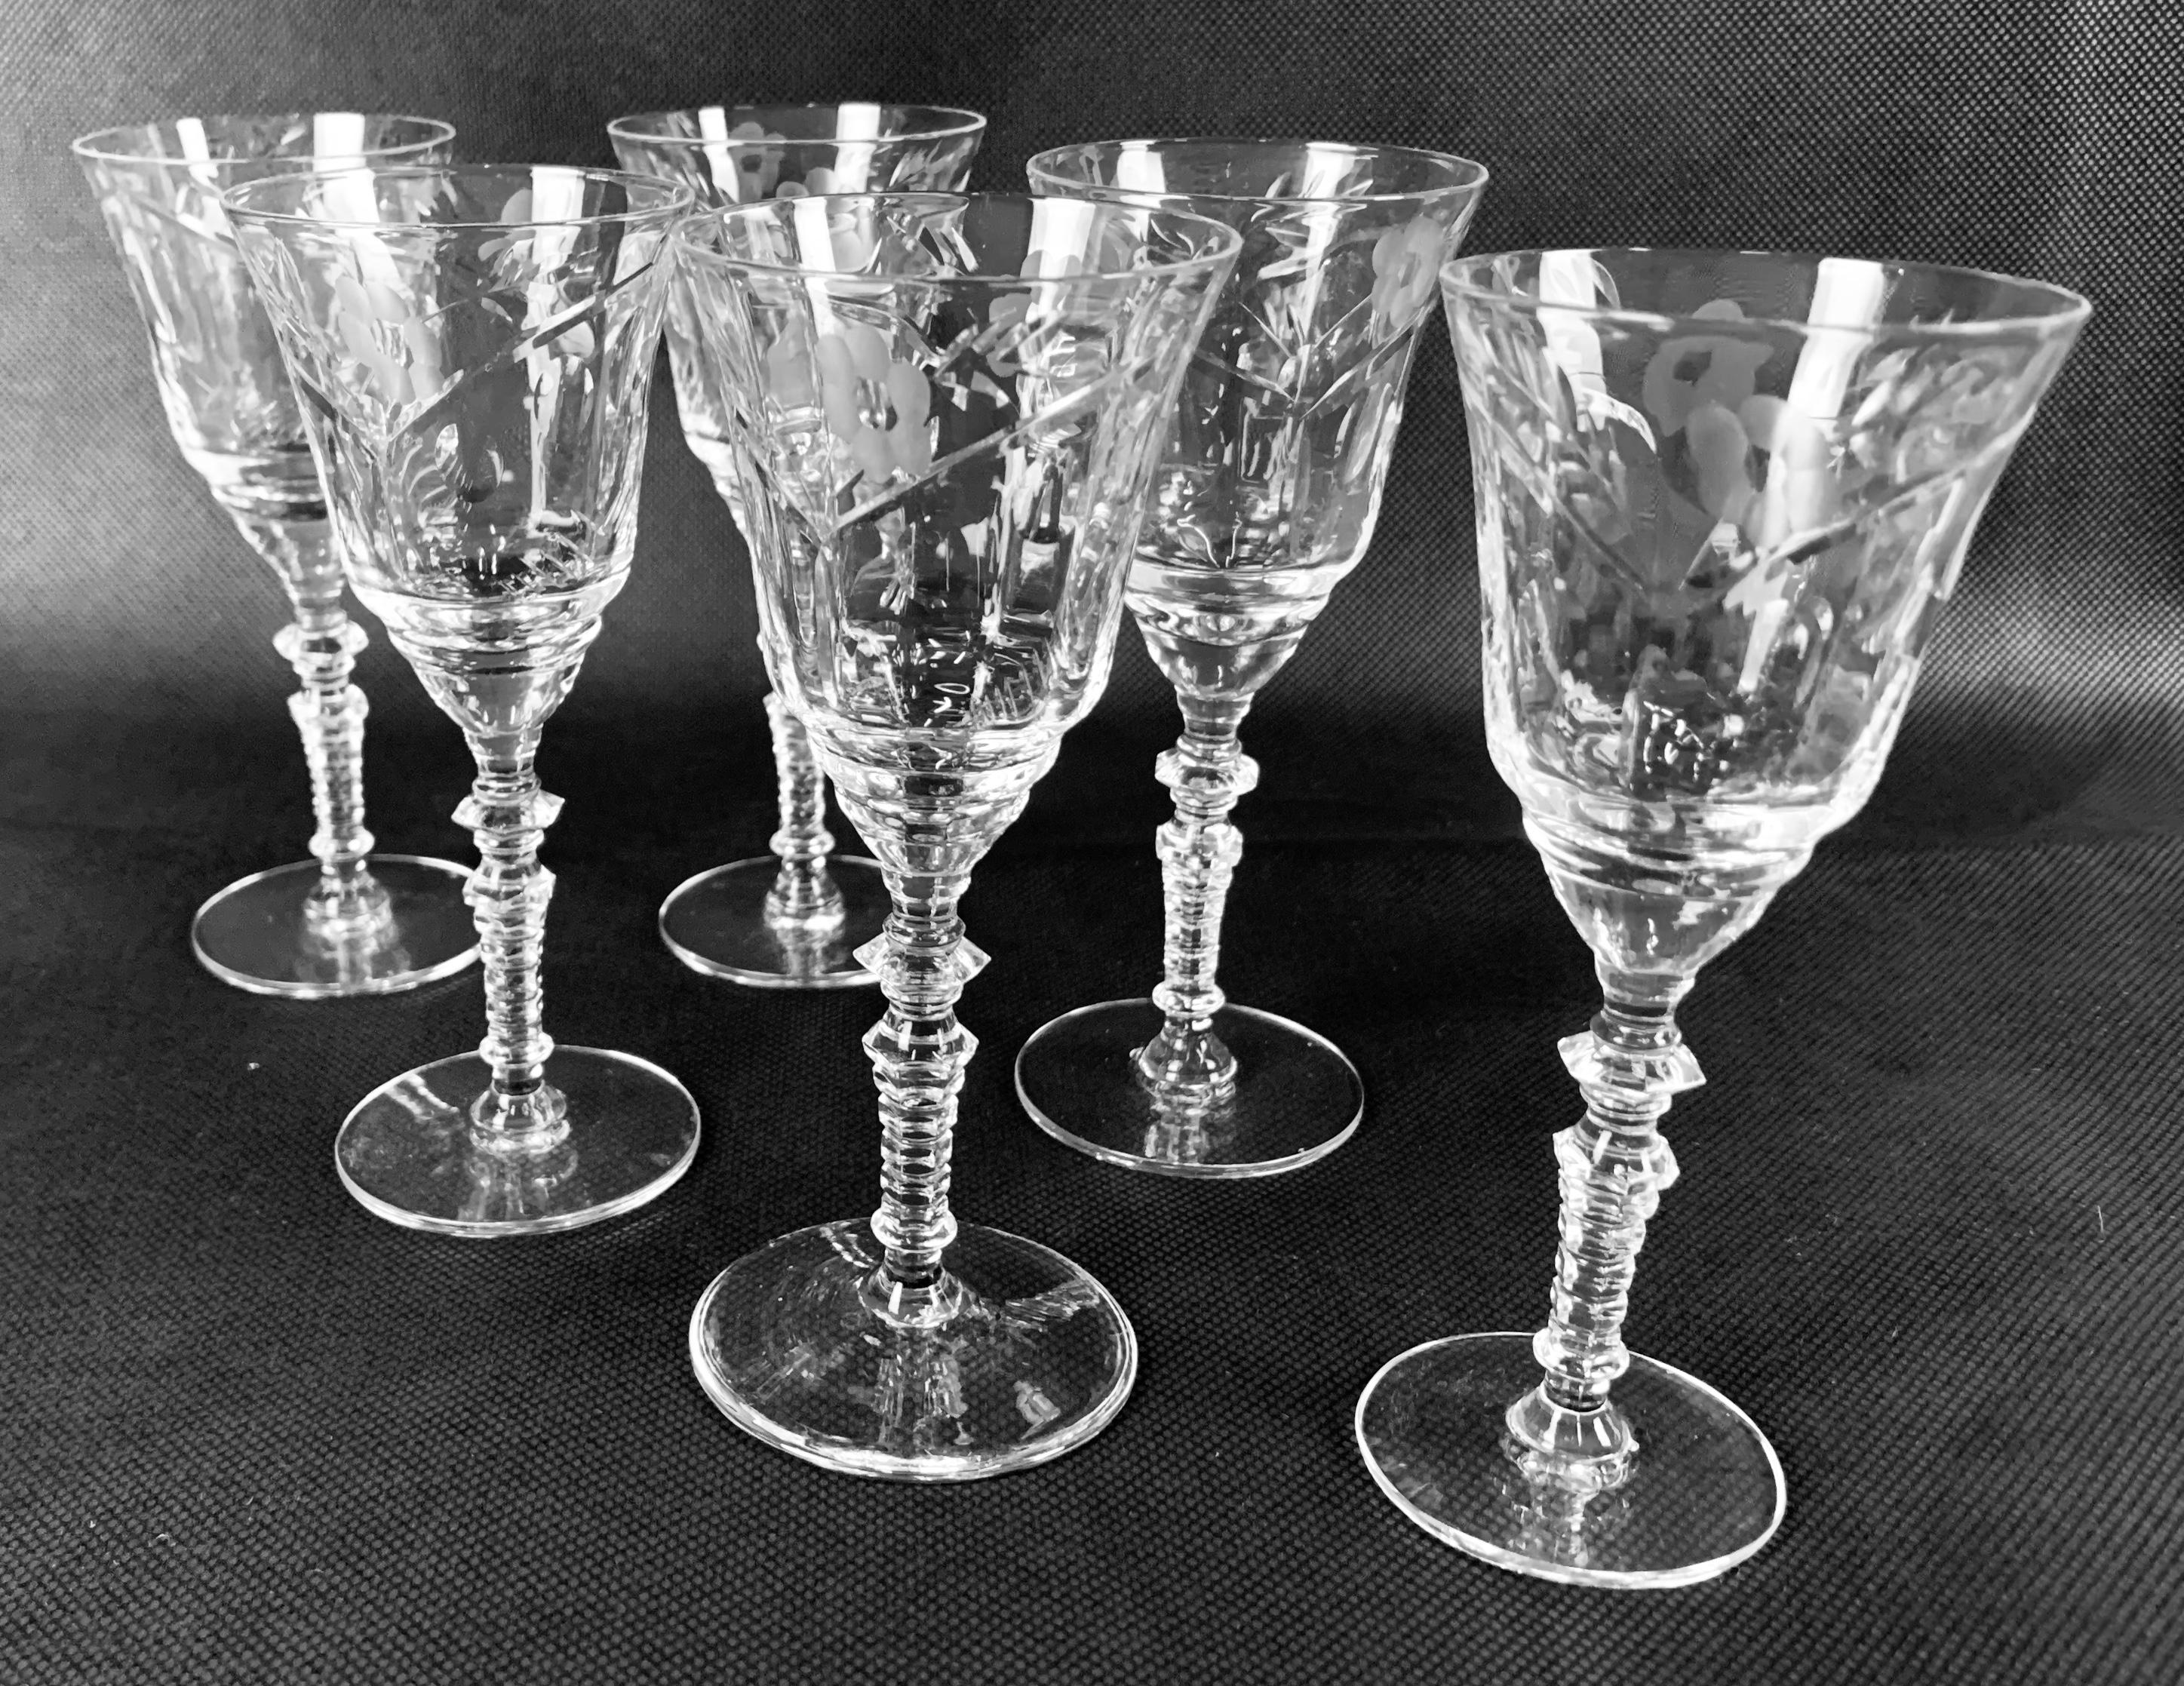 Art Deco Cordial Glasses by Rock Sharp in the Marshfield Pattern-set of six 2